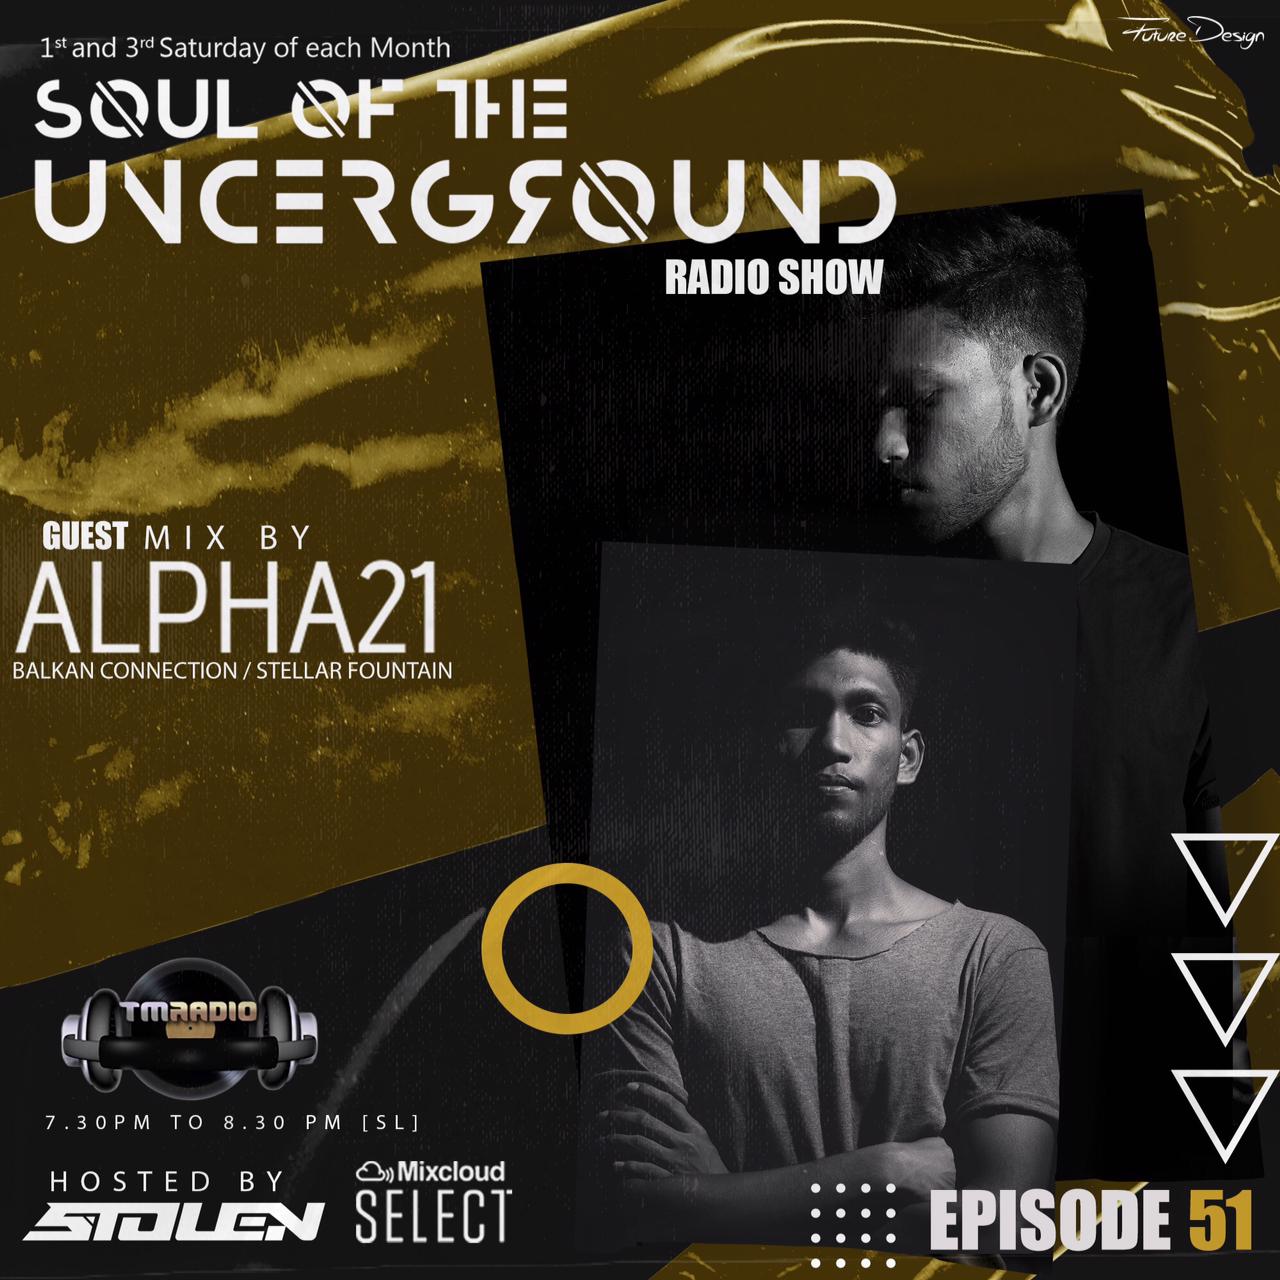 Soul of the Underground :: Episode 51 Guest mix by ALPHA21 (aired on June 18th) banner logo